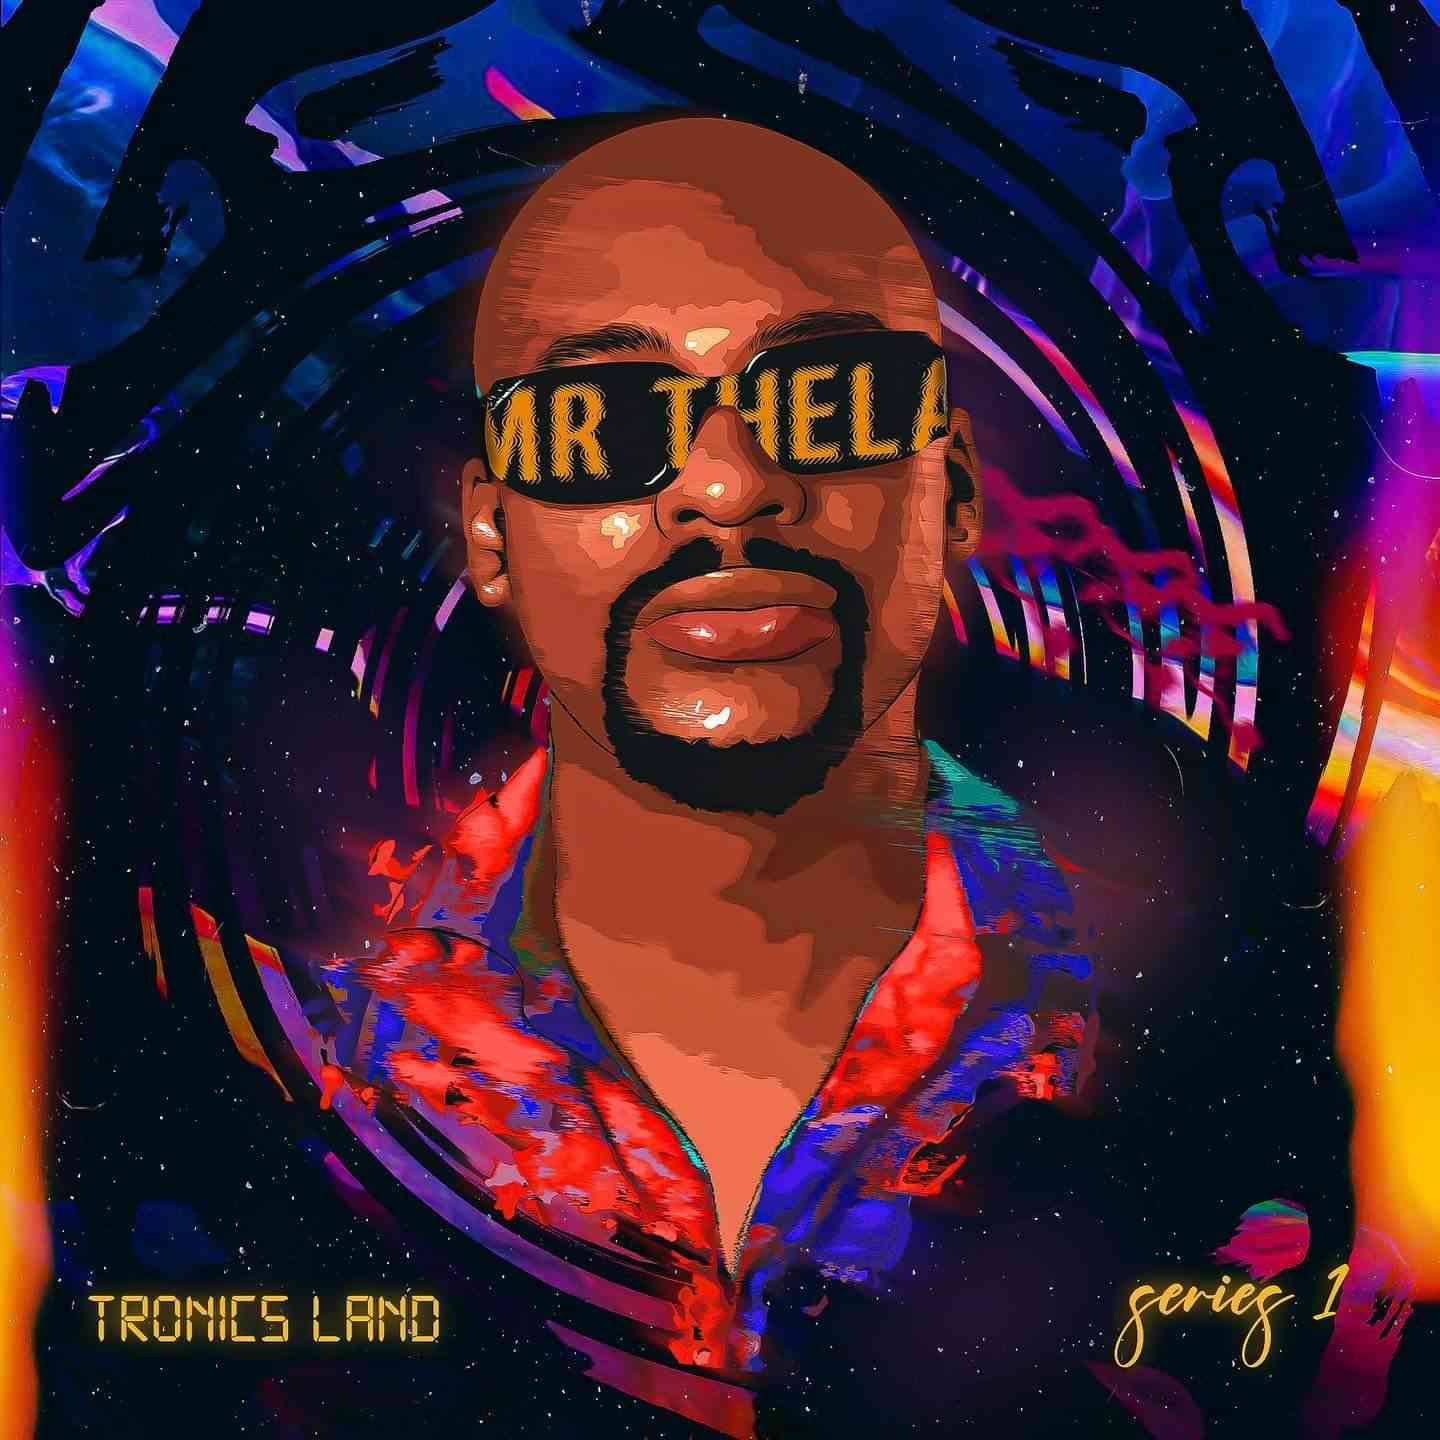 Tronics Land Series 1: Mr Thela Preparing A Festive Package For His Fans